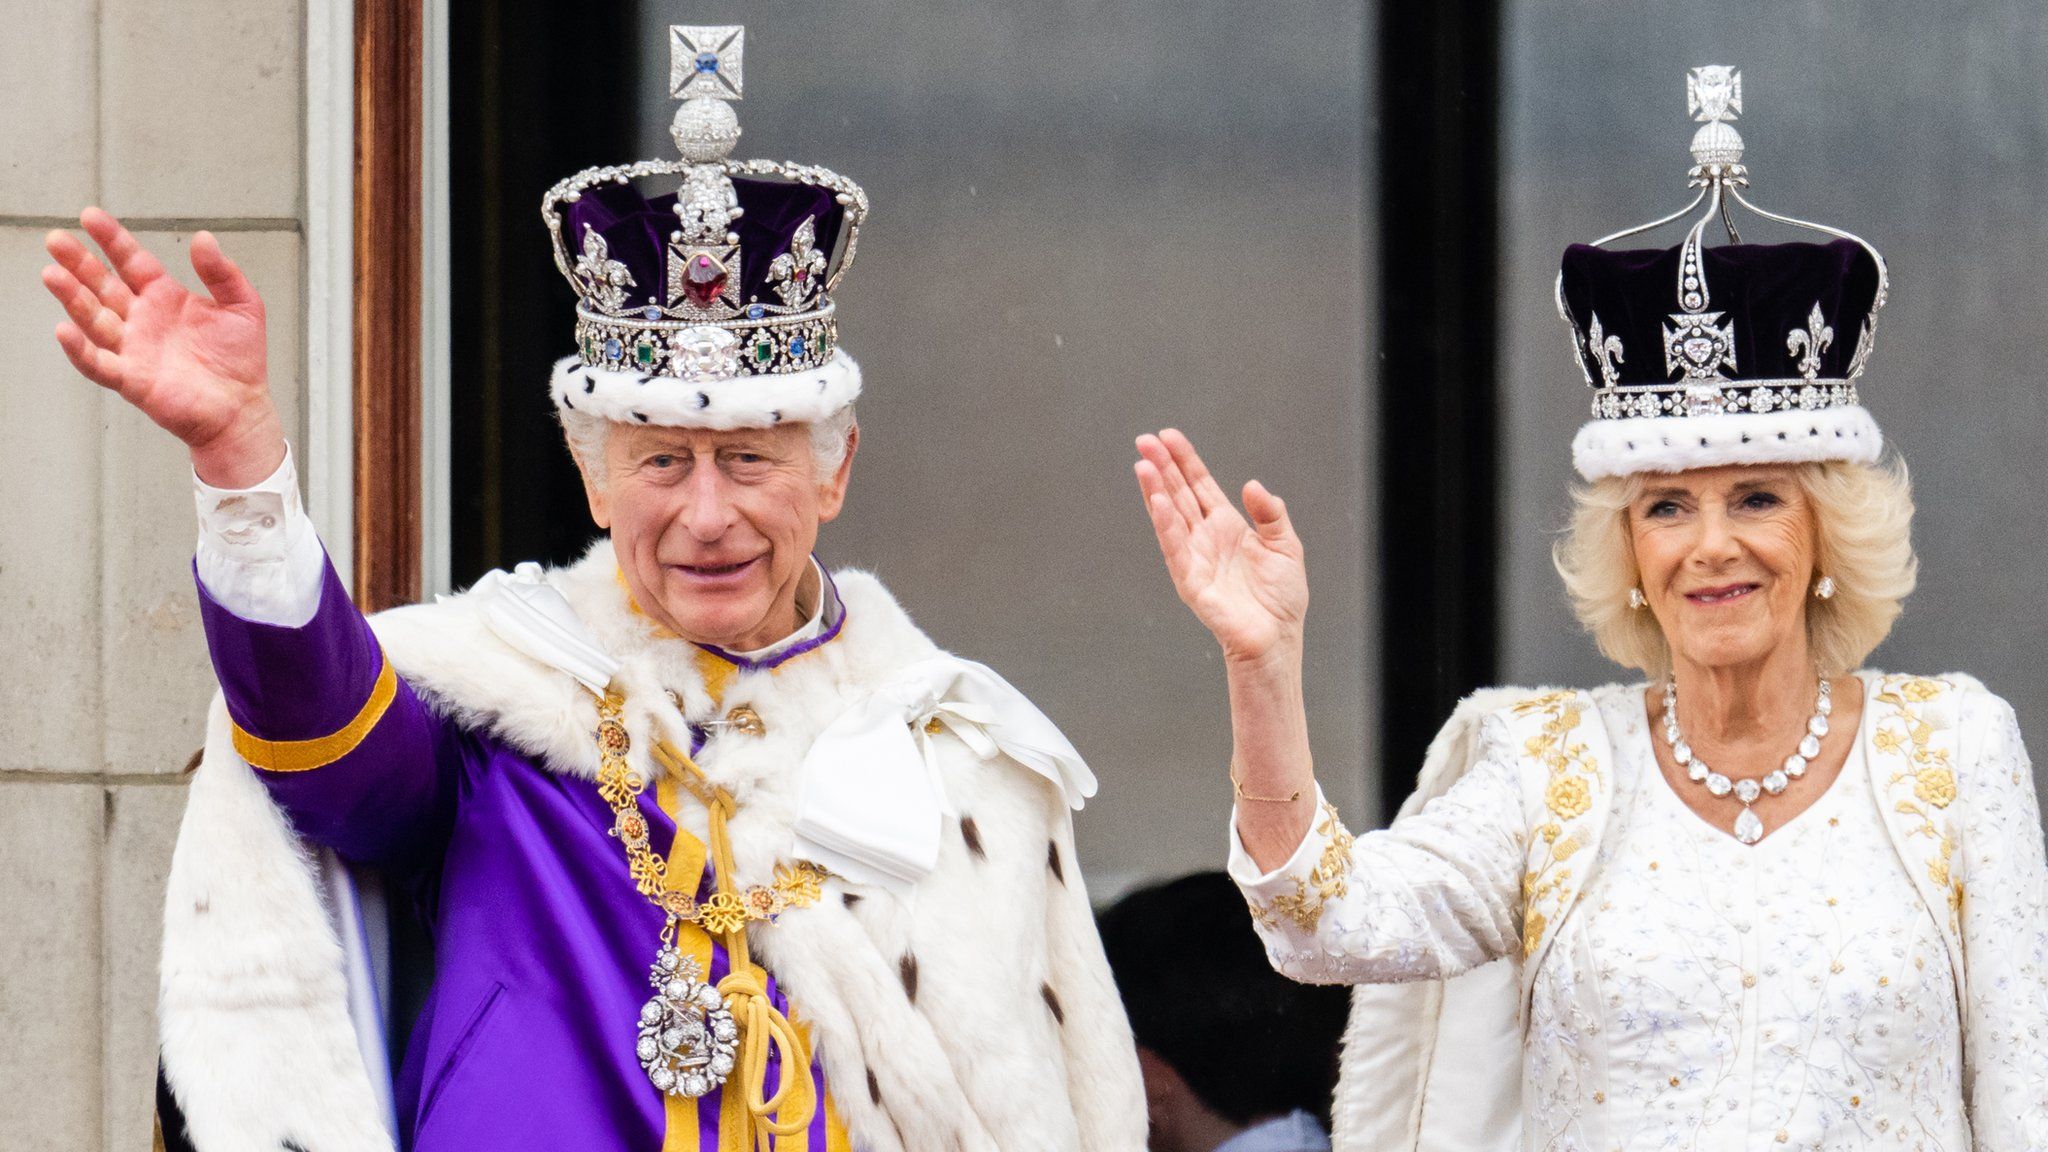 King Charles and Queen Camilla wave to crowds on the balcony of Buckingham Palace